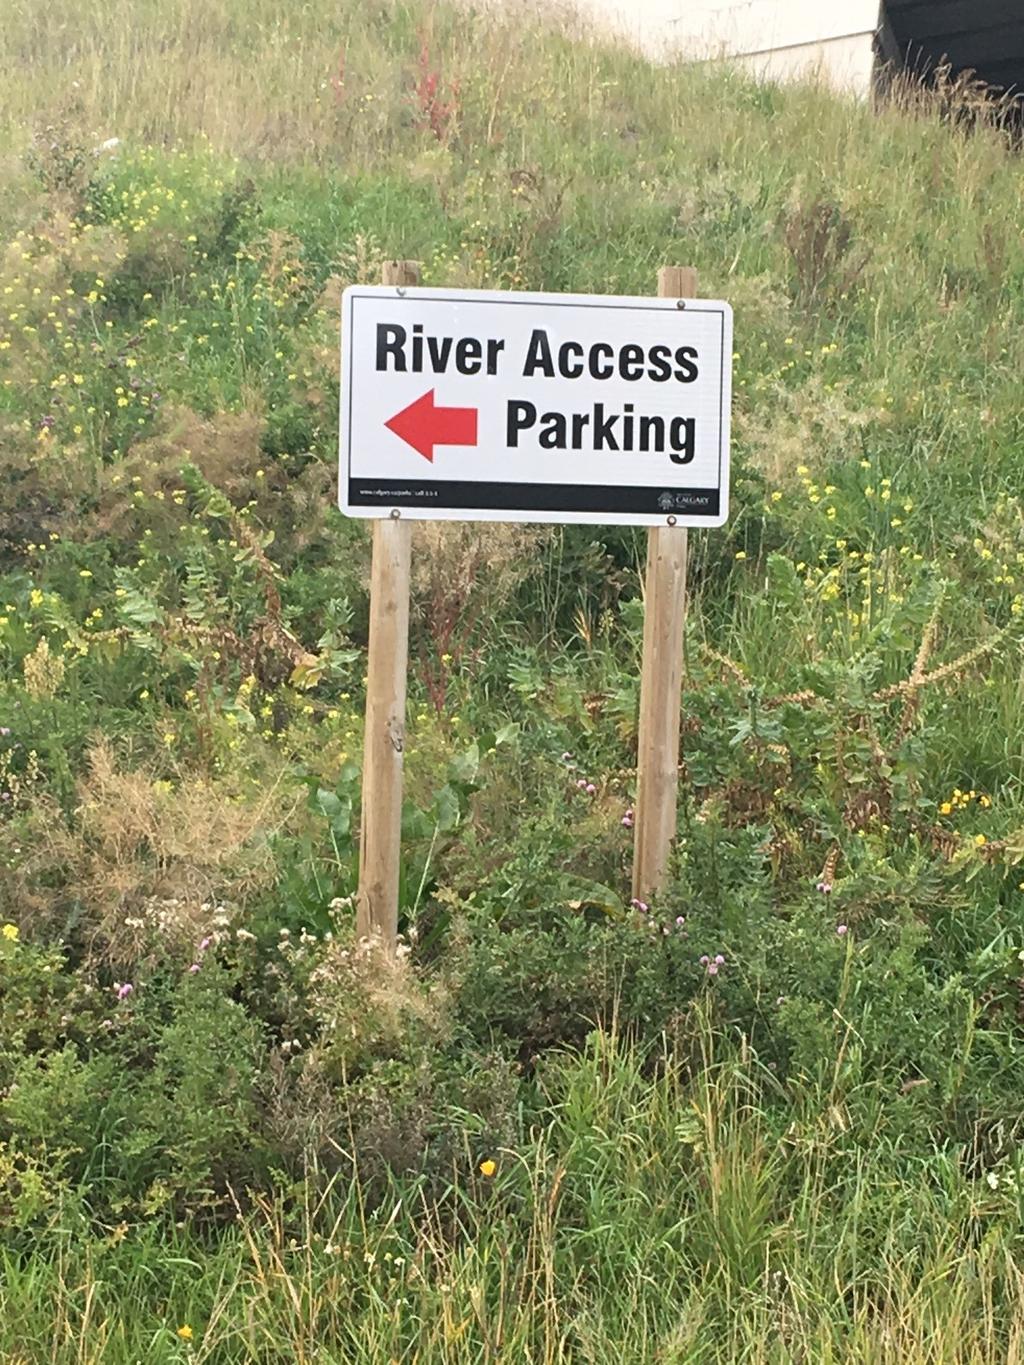 Maps will be created for the river access system, similar to the Calgary Parks and Pathways map.